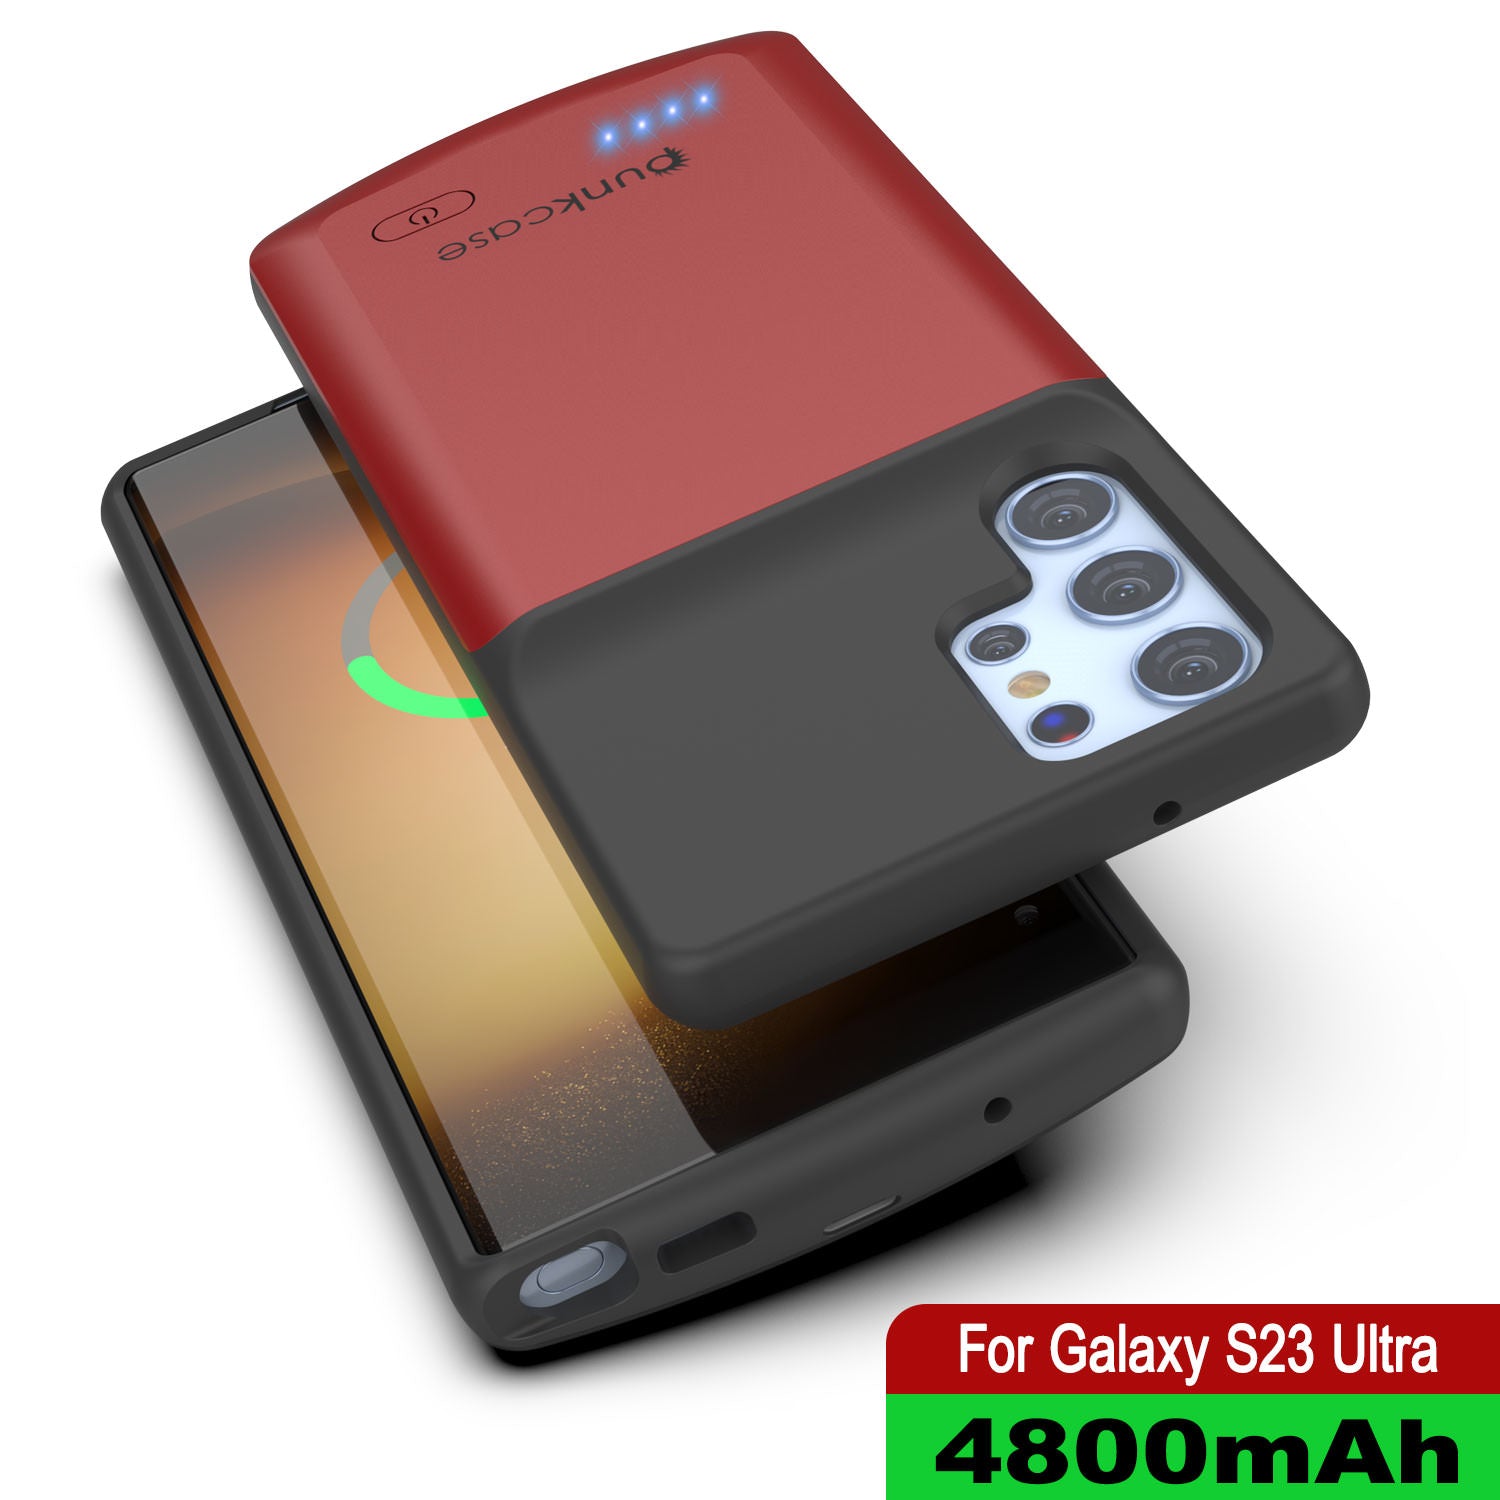 PunkJuice S23 Ultra Battery Case Red - Portable Charging Power Juice Bank with 4800mAh